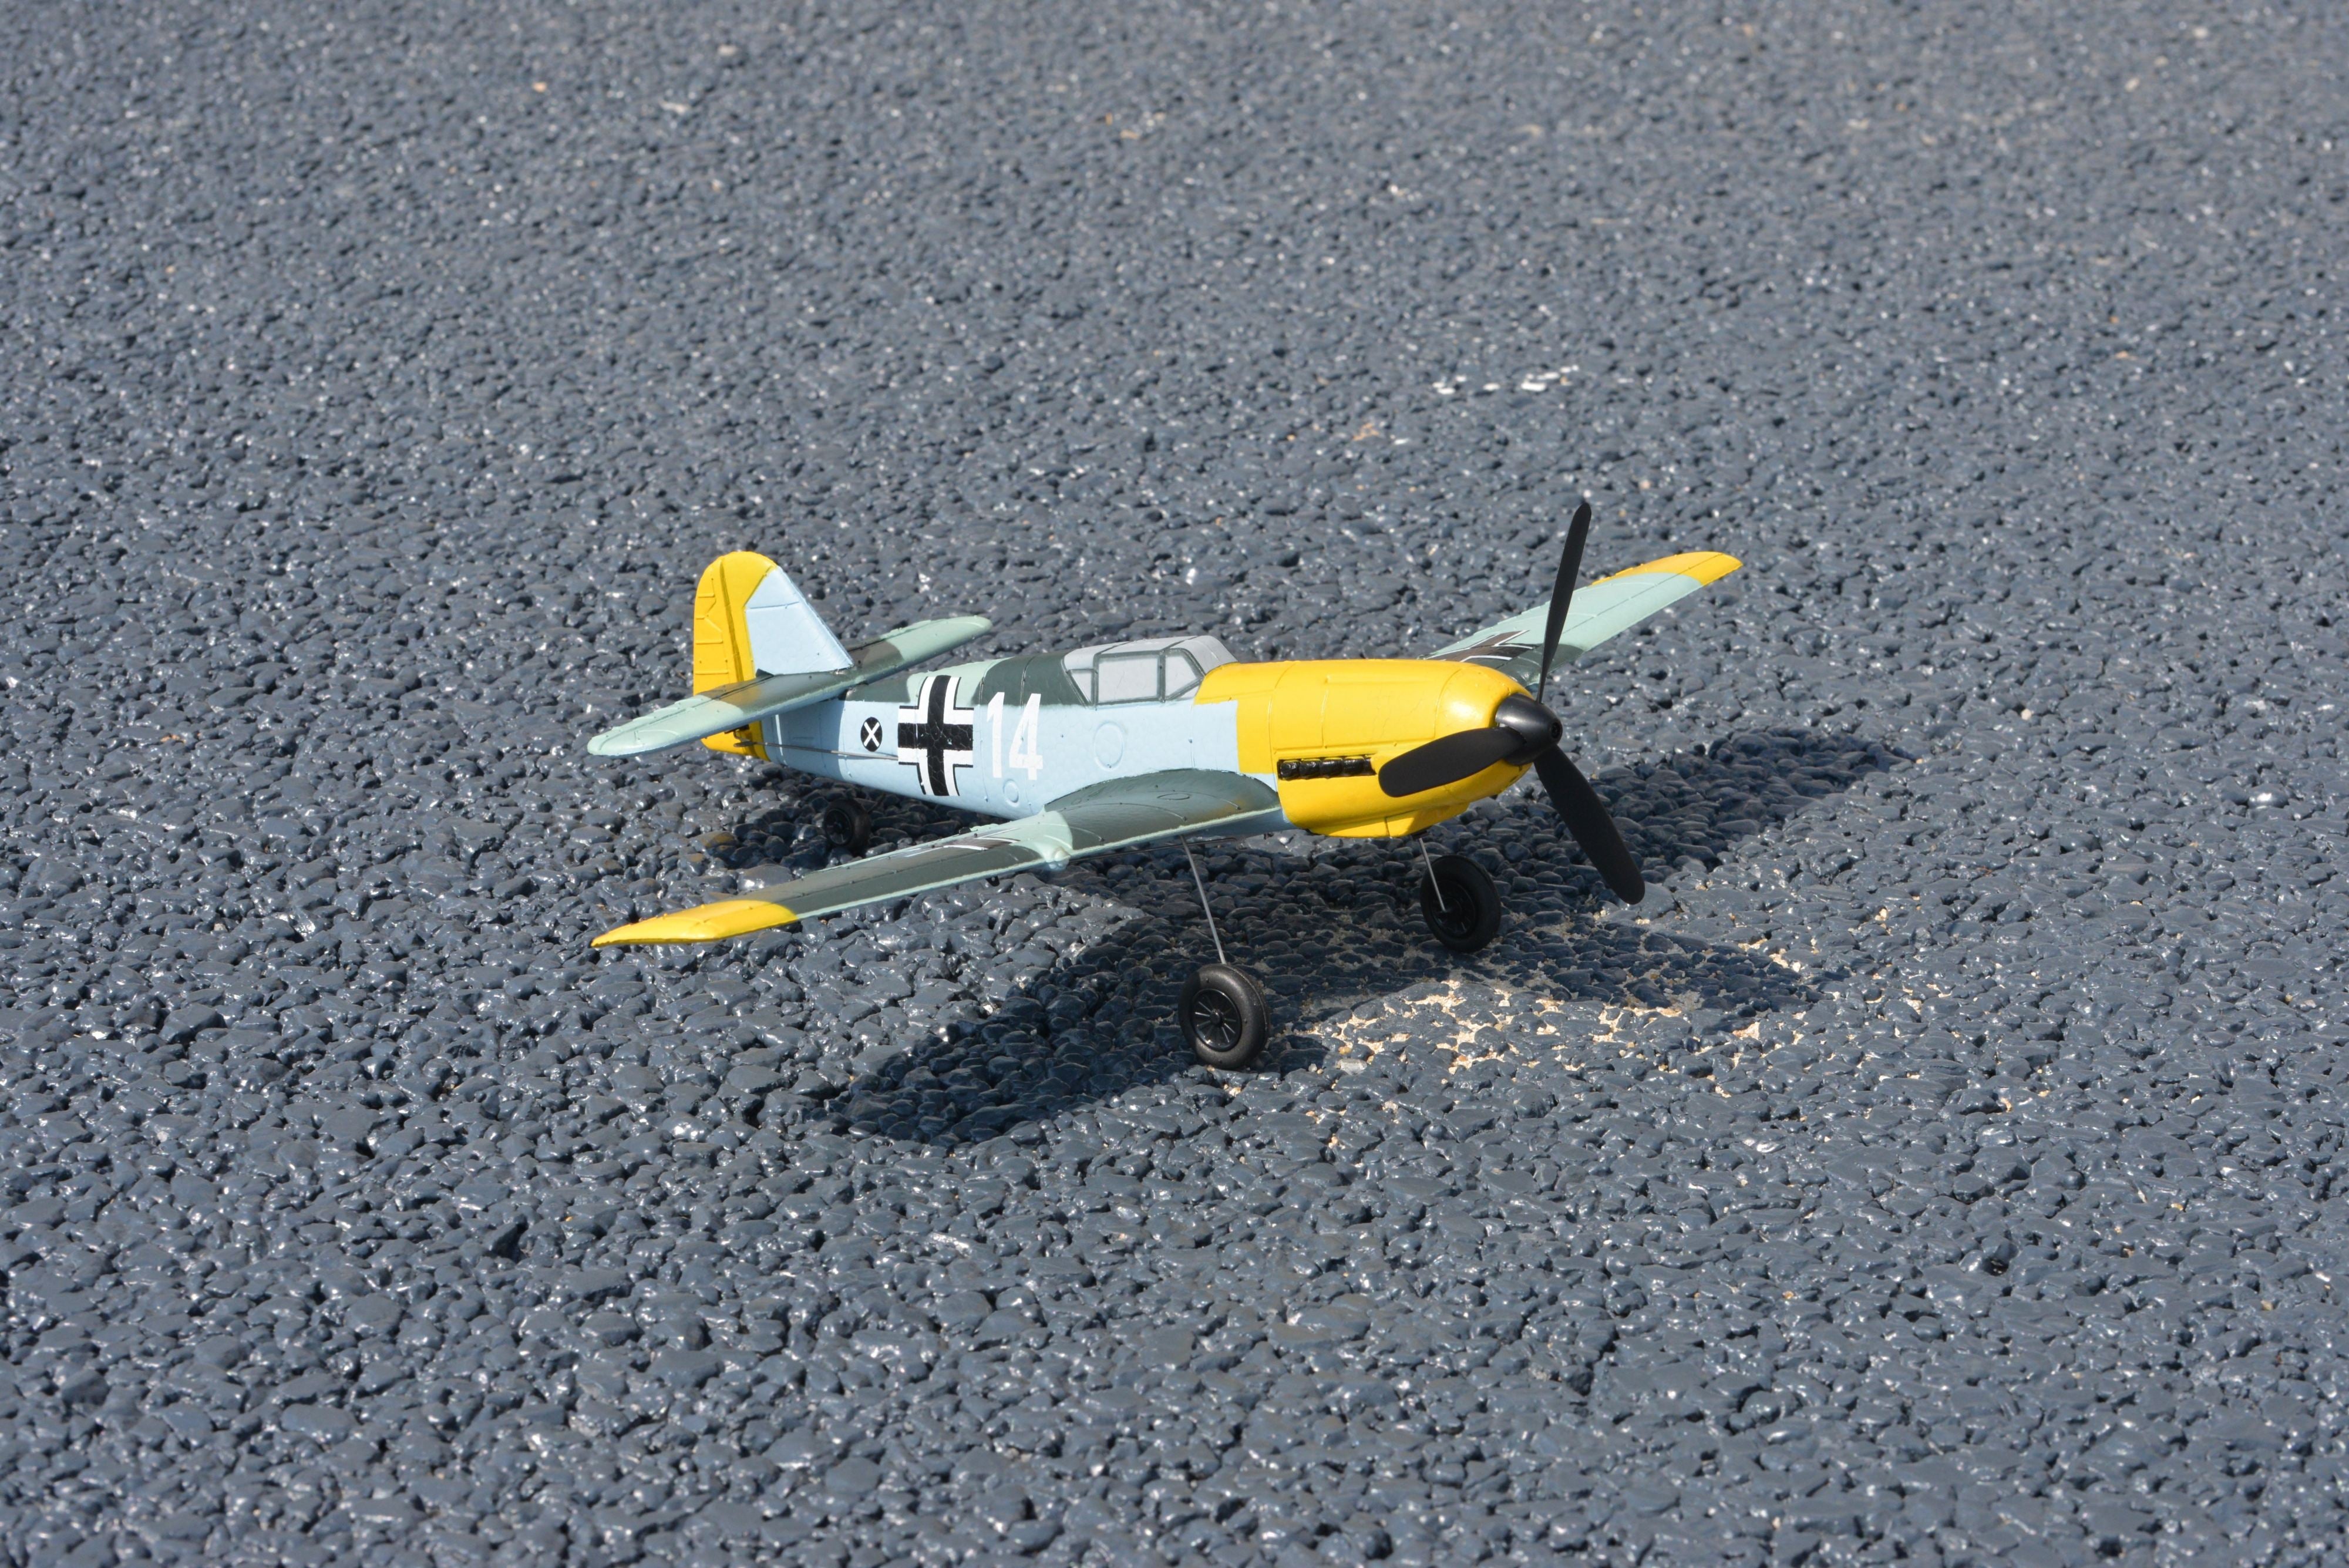 How should a novice choose a remote-controlled aircraft